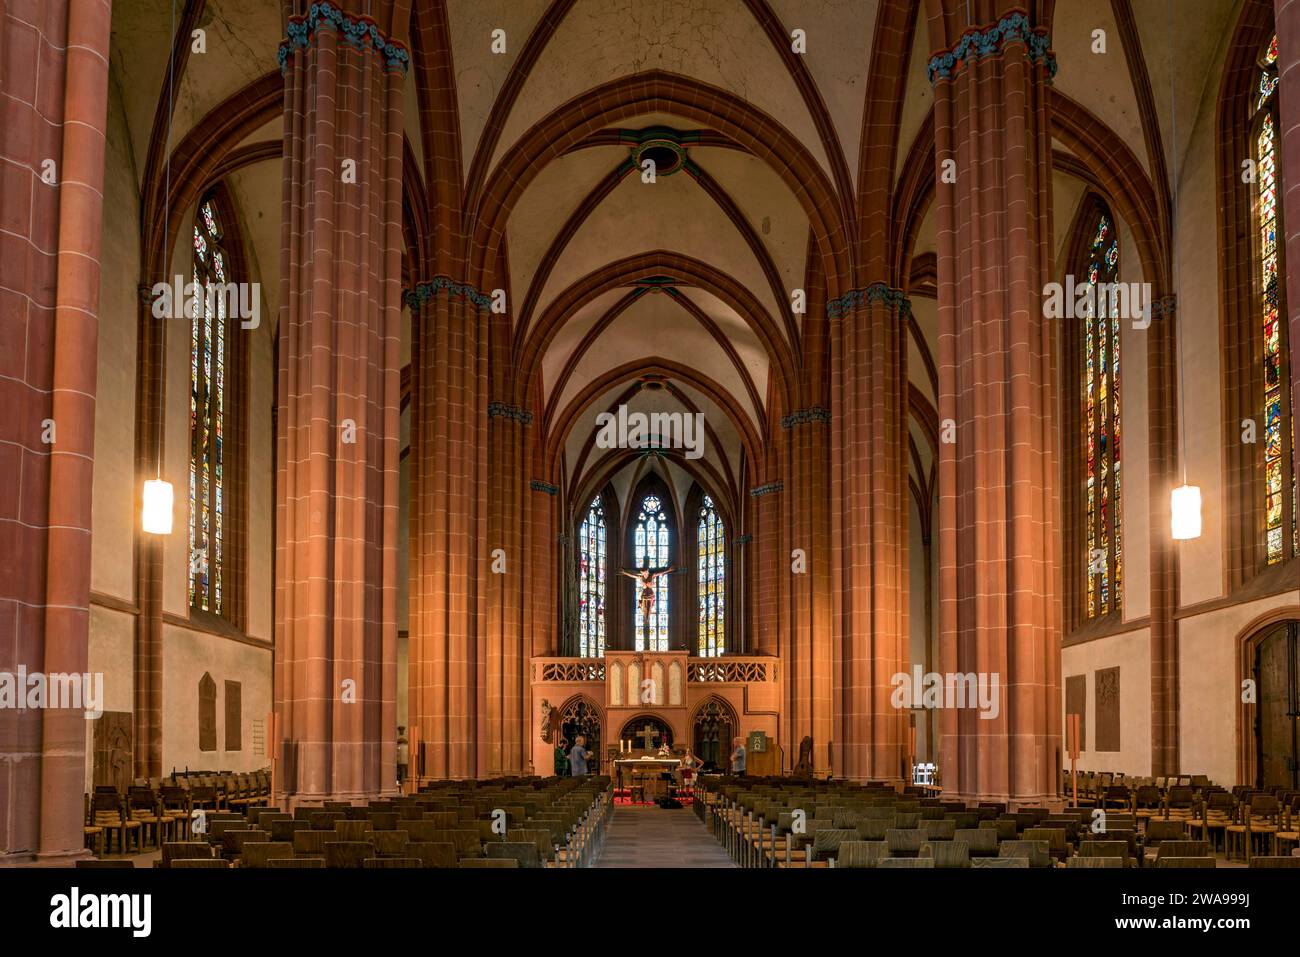 Church of Our Lady, Gothic hall church, interior, nave with cross vault, arcades, altar, rood screen, old town centre, Friedberg, Wetterau, Hesse, Ger Stock Photo